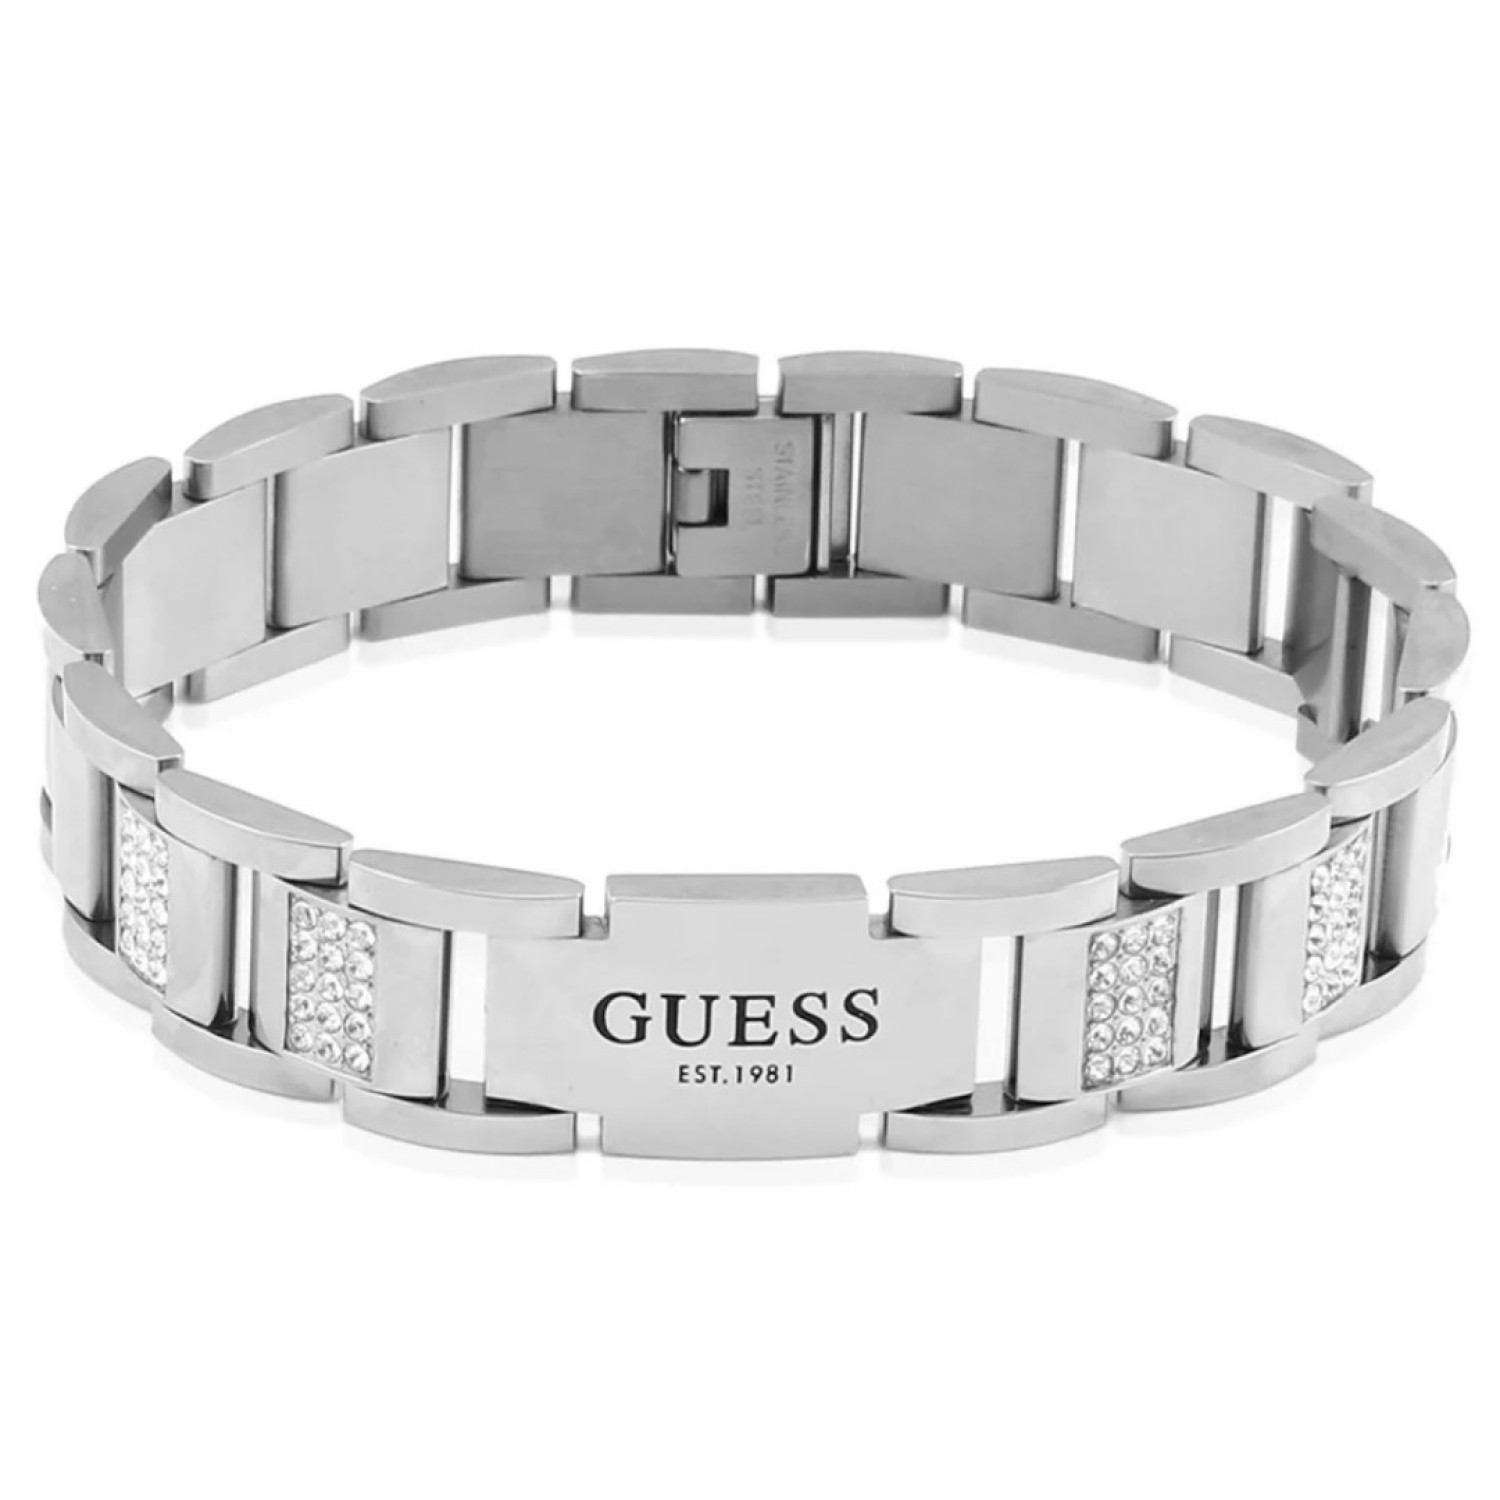 Guess Frontier Crystal Bracelet in 15mm in Silver UMB20008 guess jewellery